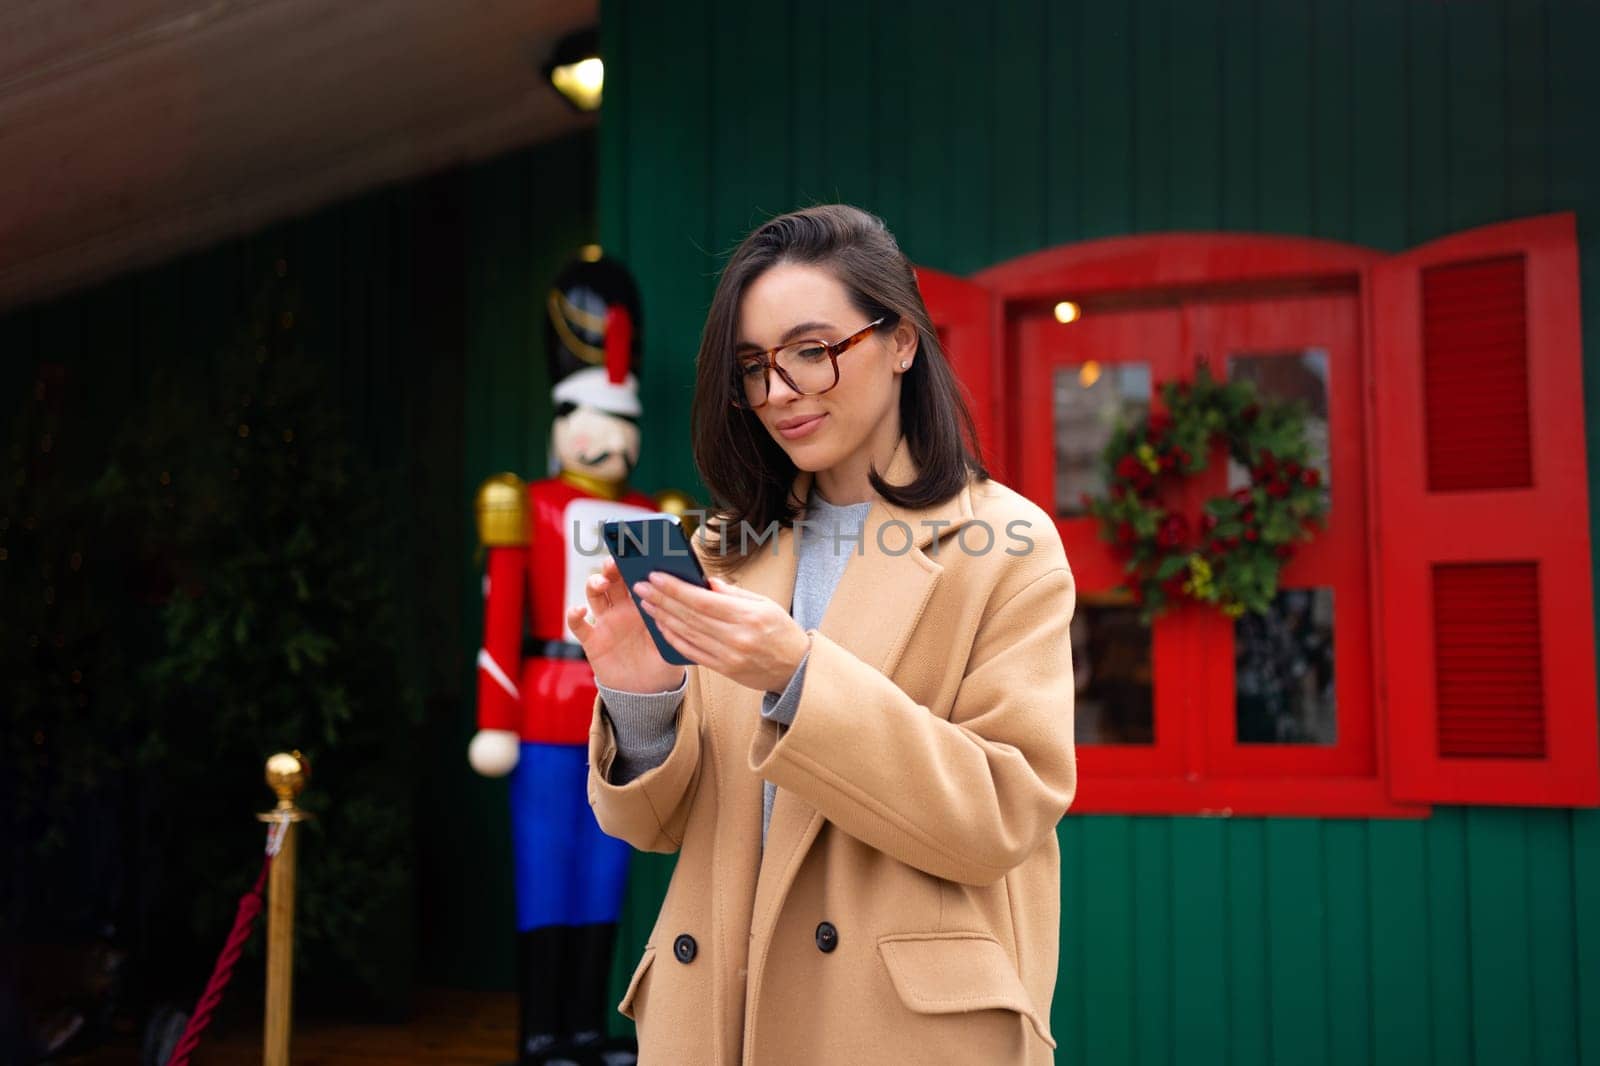 Smiling business woman wearing trench coat standing on Christmas city street using smartphone applications on cell phone, reading news on smartphone, fast connection, checking mobile apps outdoors.